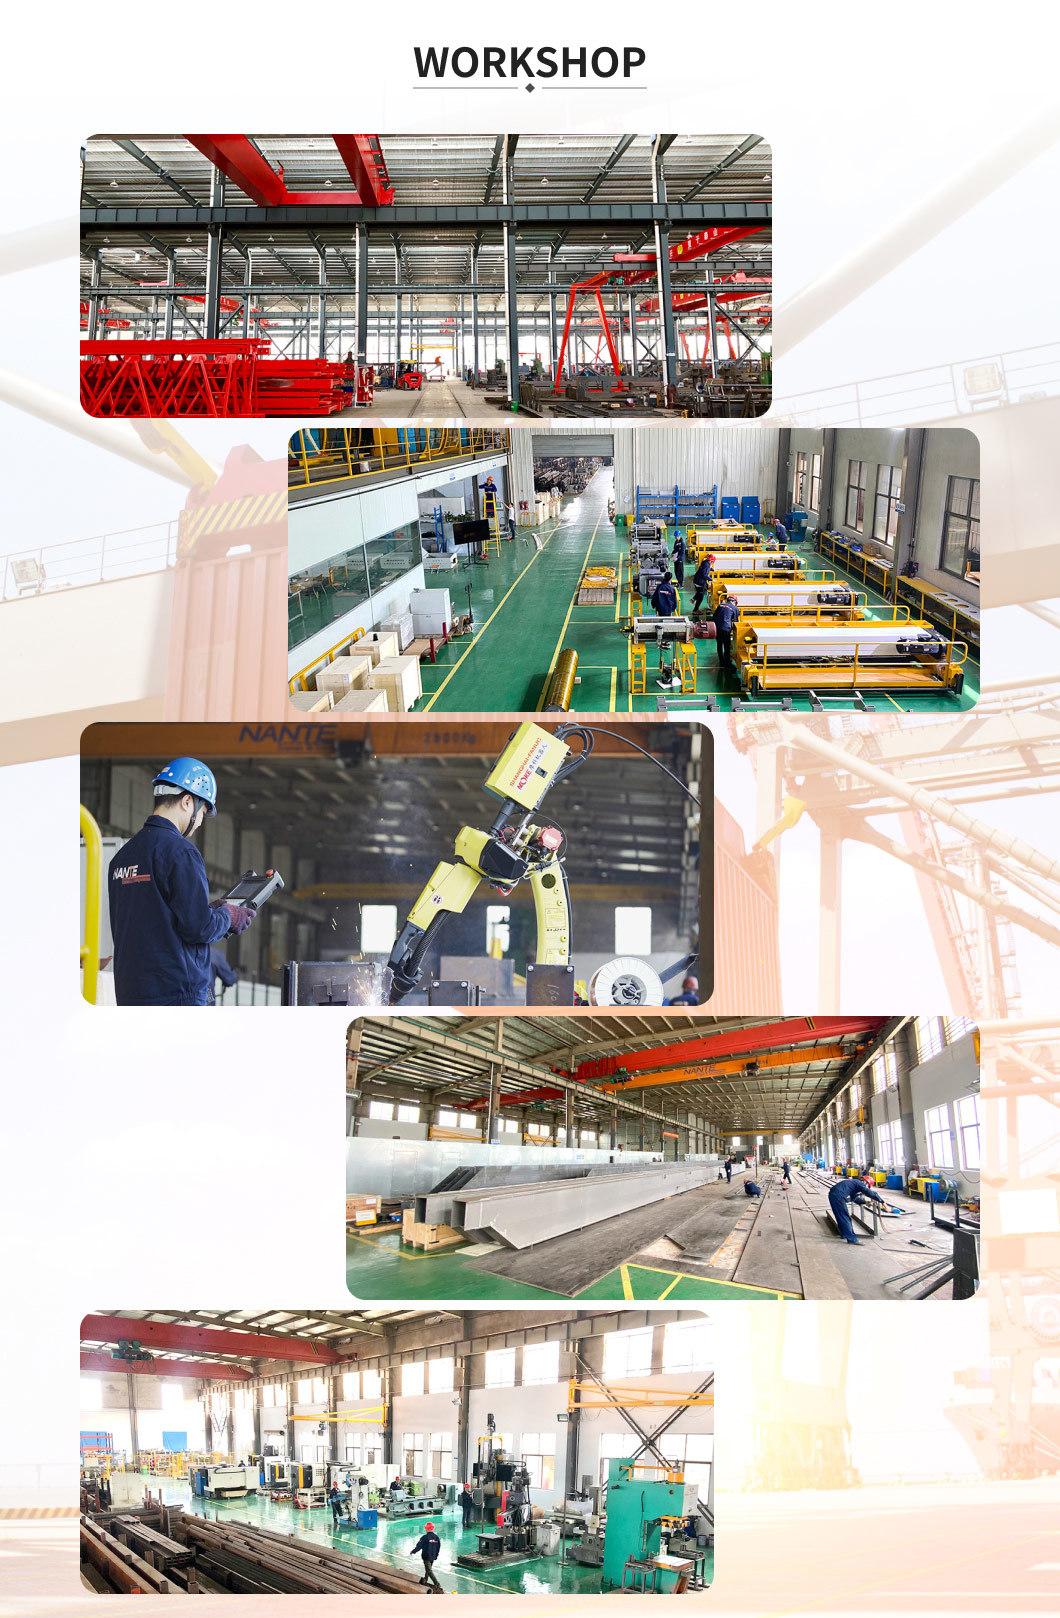 Bzd Type Pillar Cantilever Crane 360 Degree Rotational Angle with Latest Technology